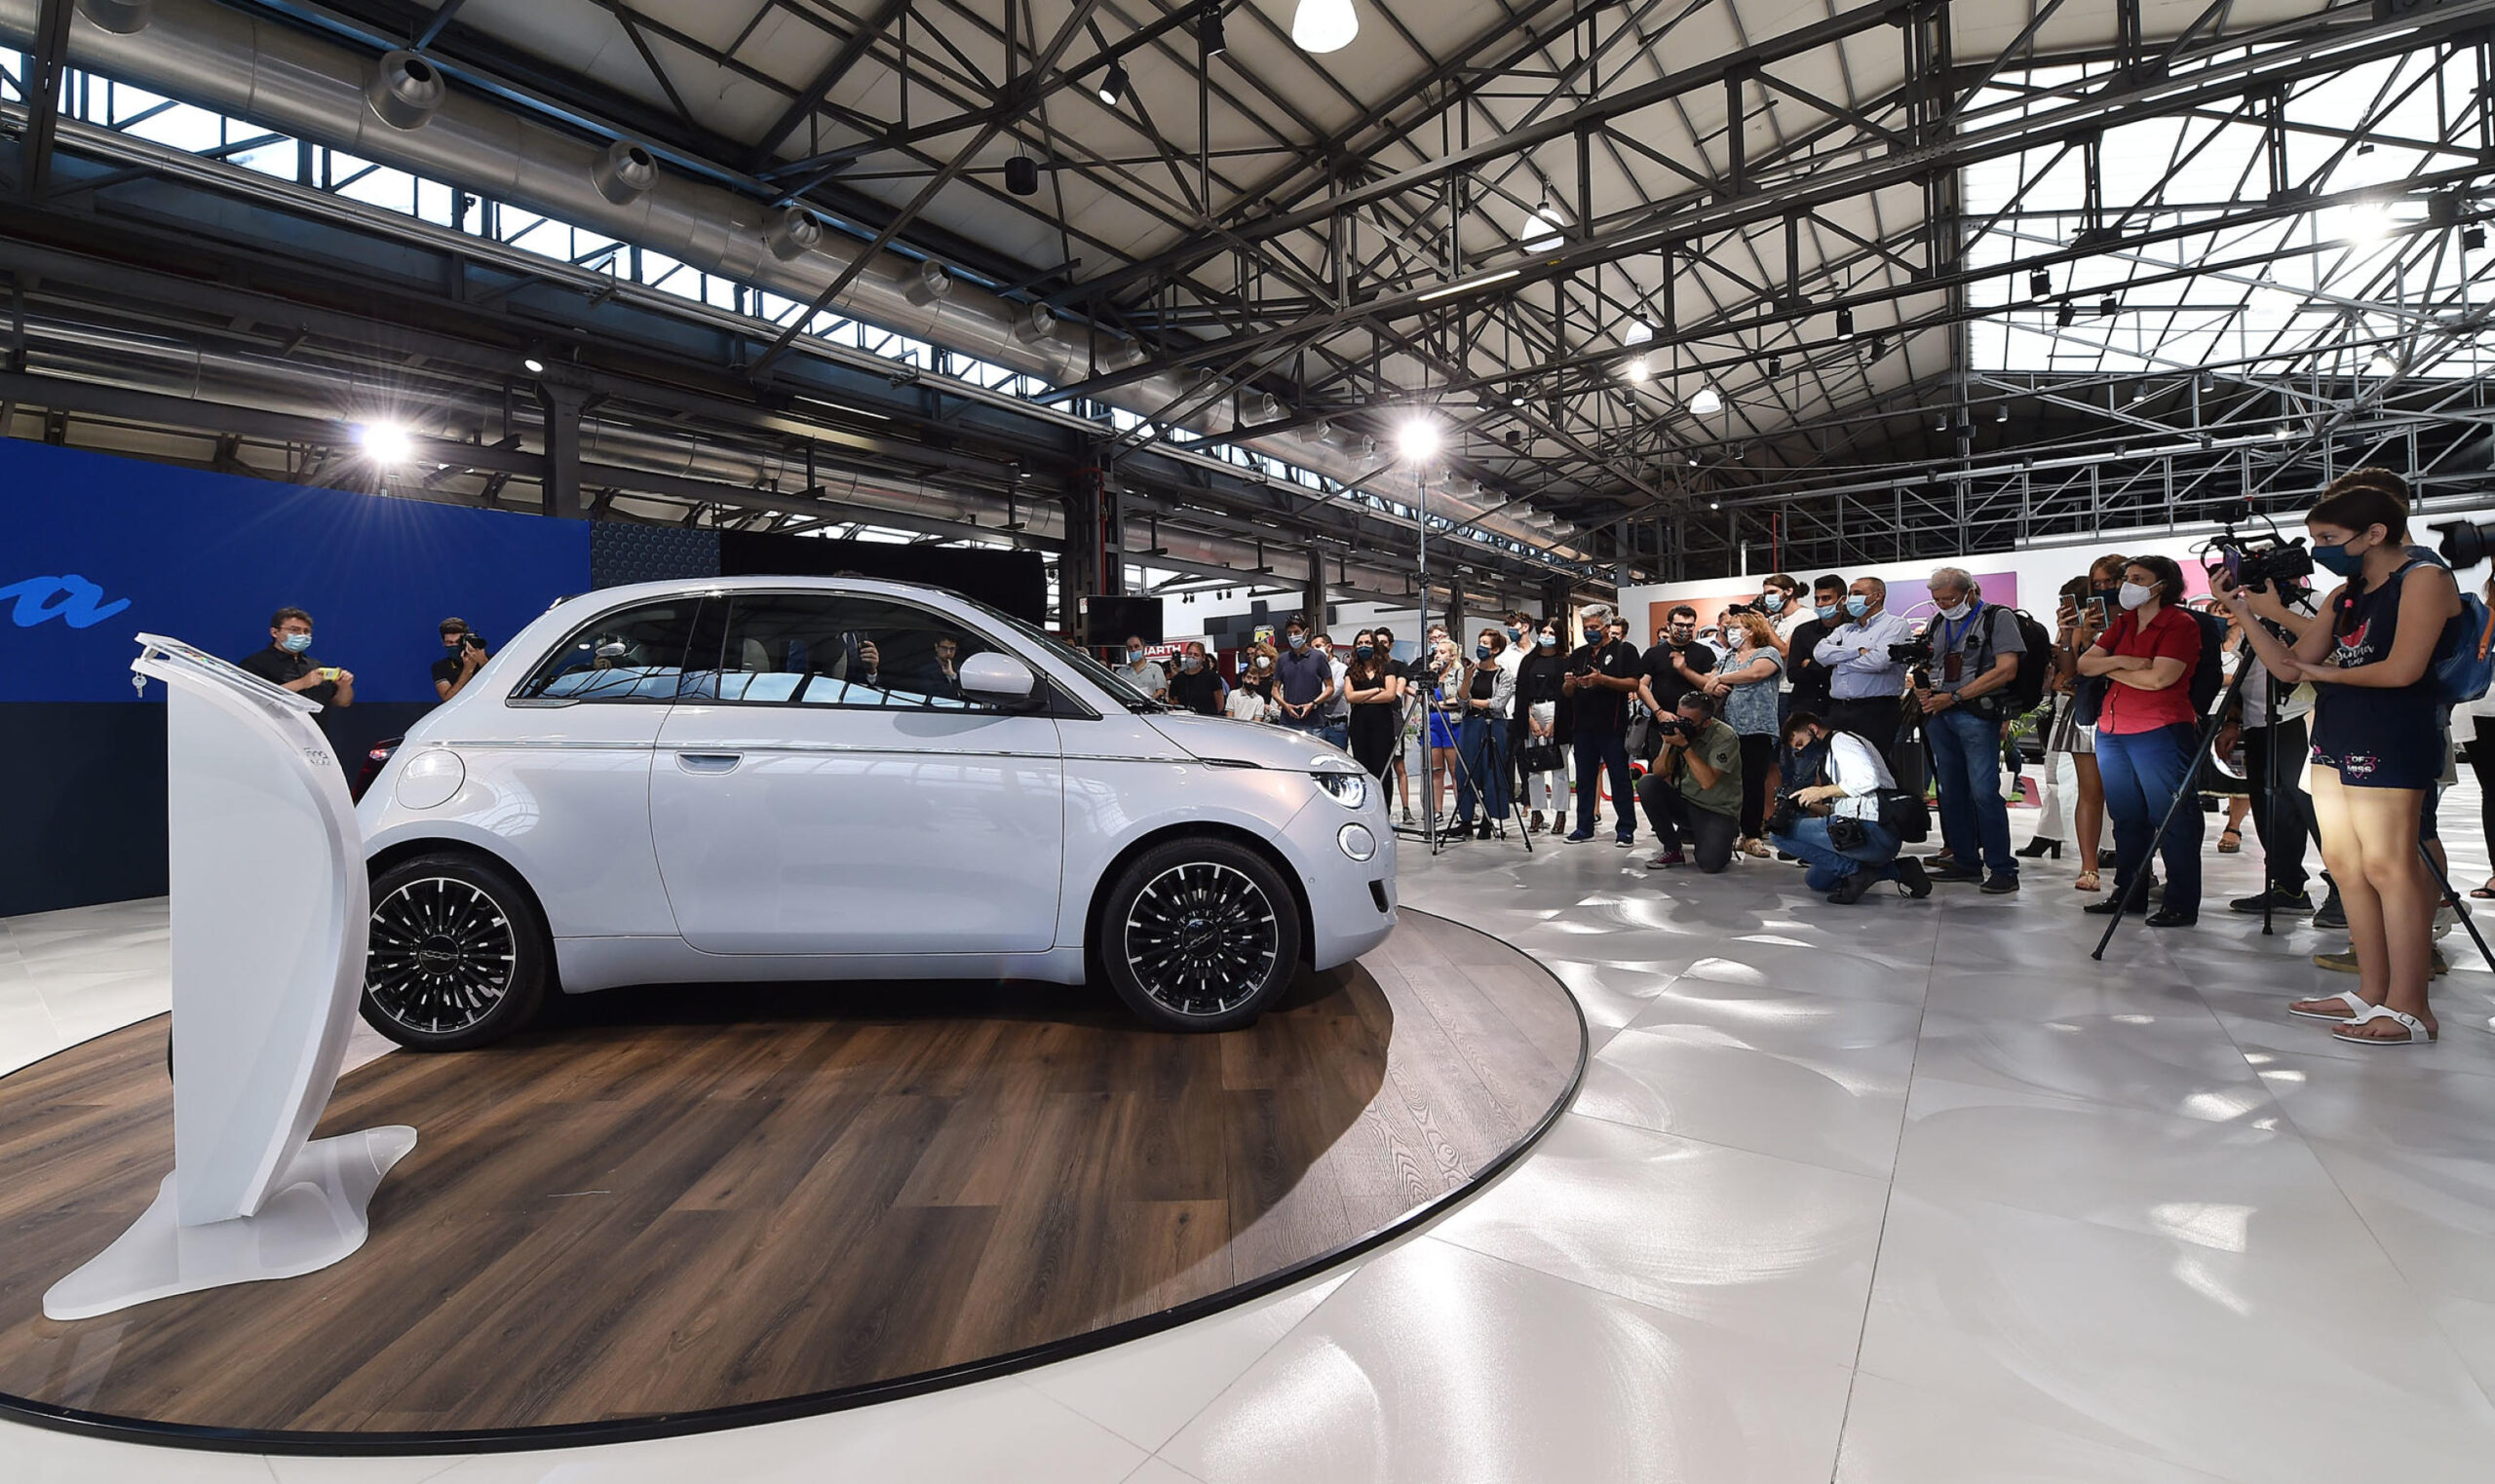 The new electric 500, built in the Fiat Mirafiori factory, is presented to the public at the Mirafiori Motor Village, in Turin, Italy, 14 July 2020.
ANSA/ ALESSANDRO DI MARCO